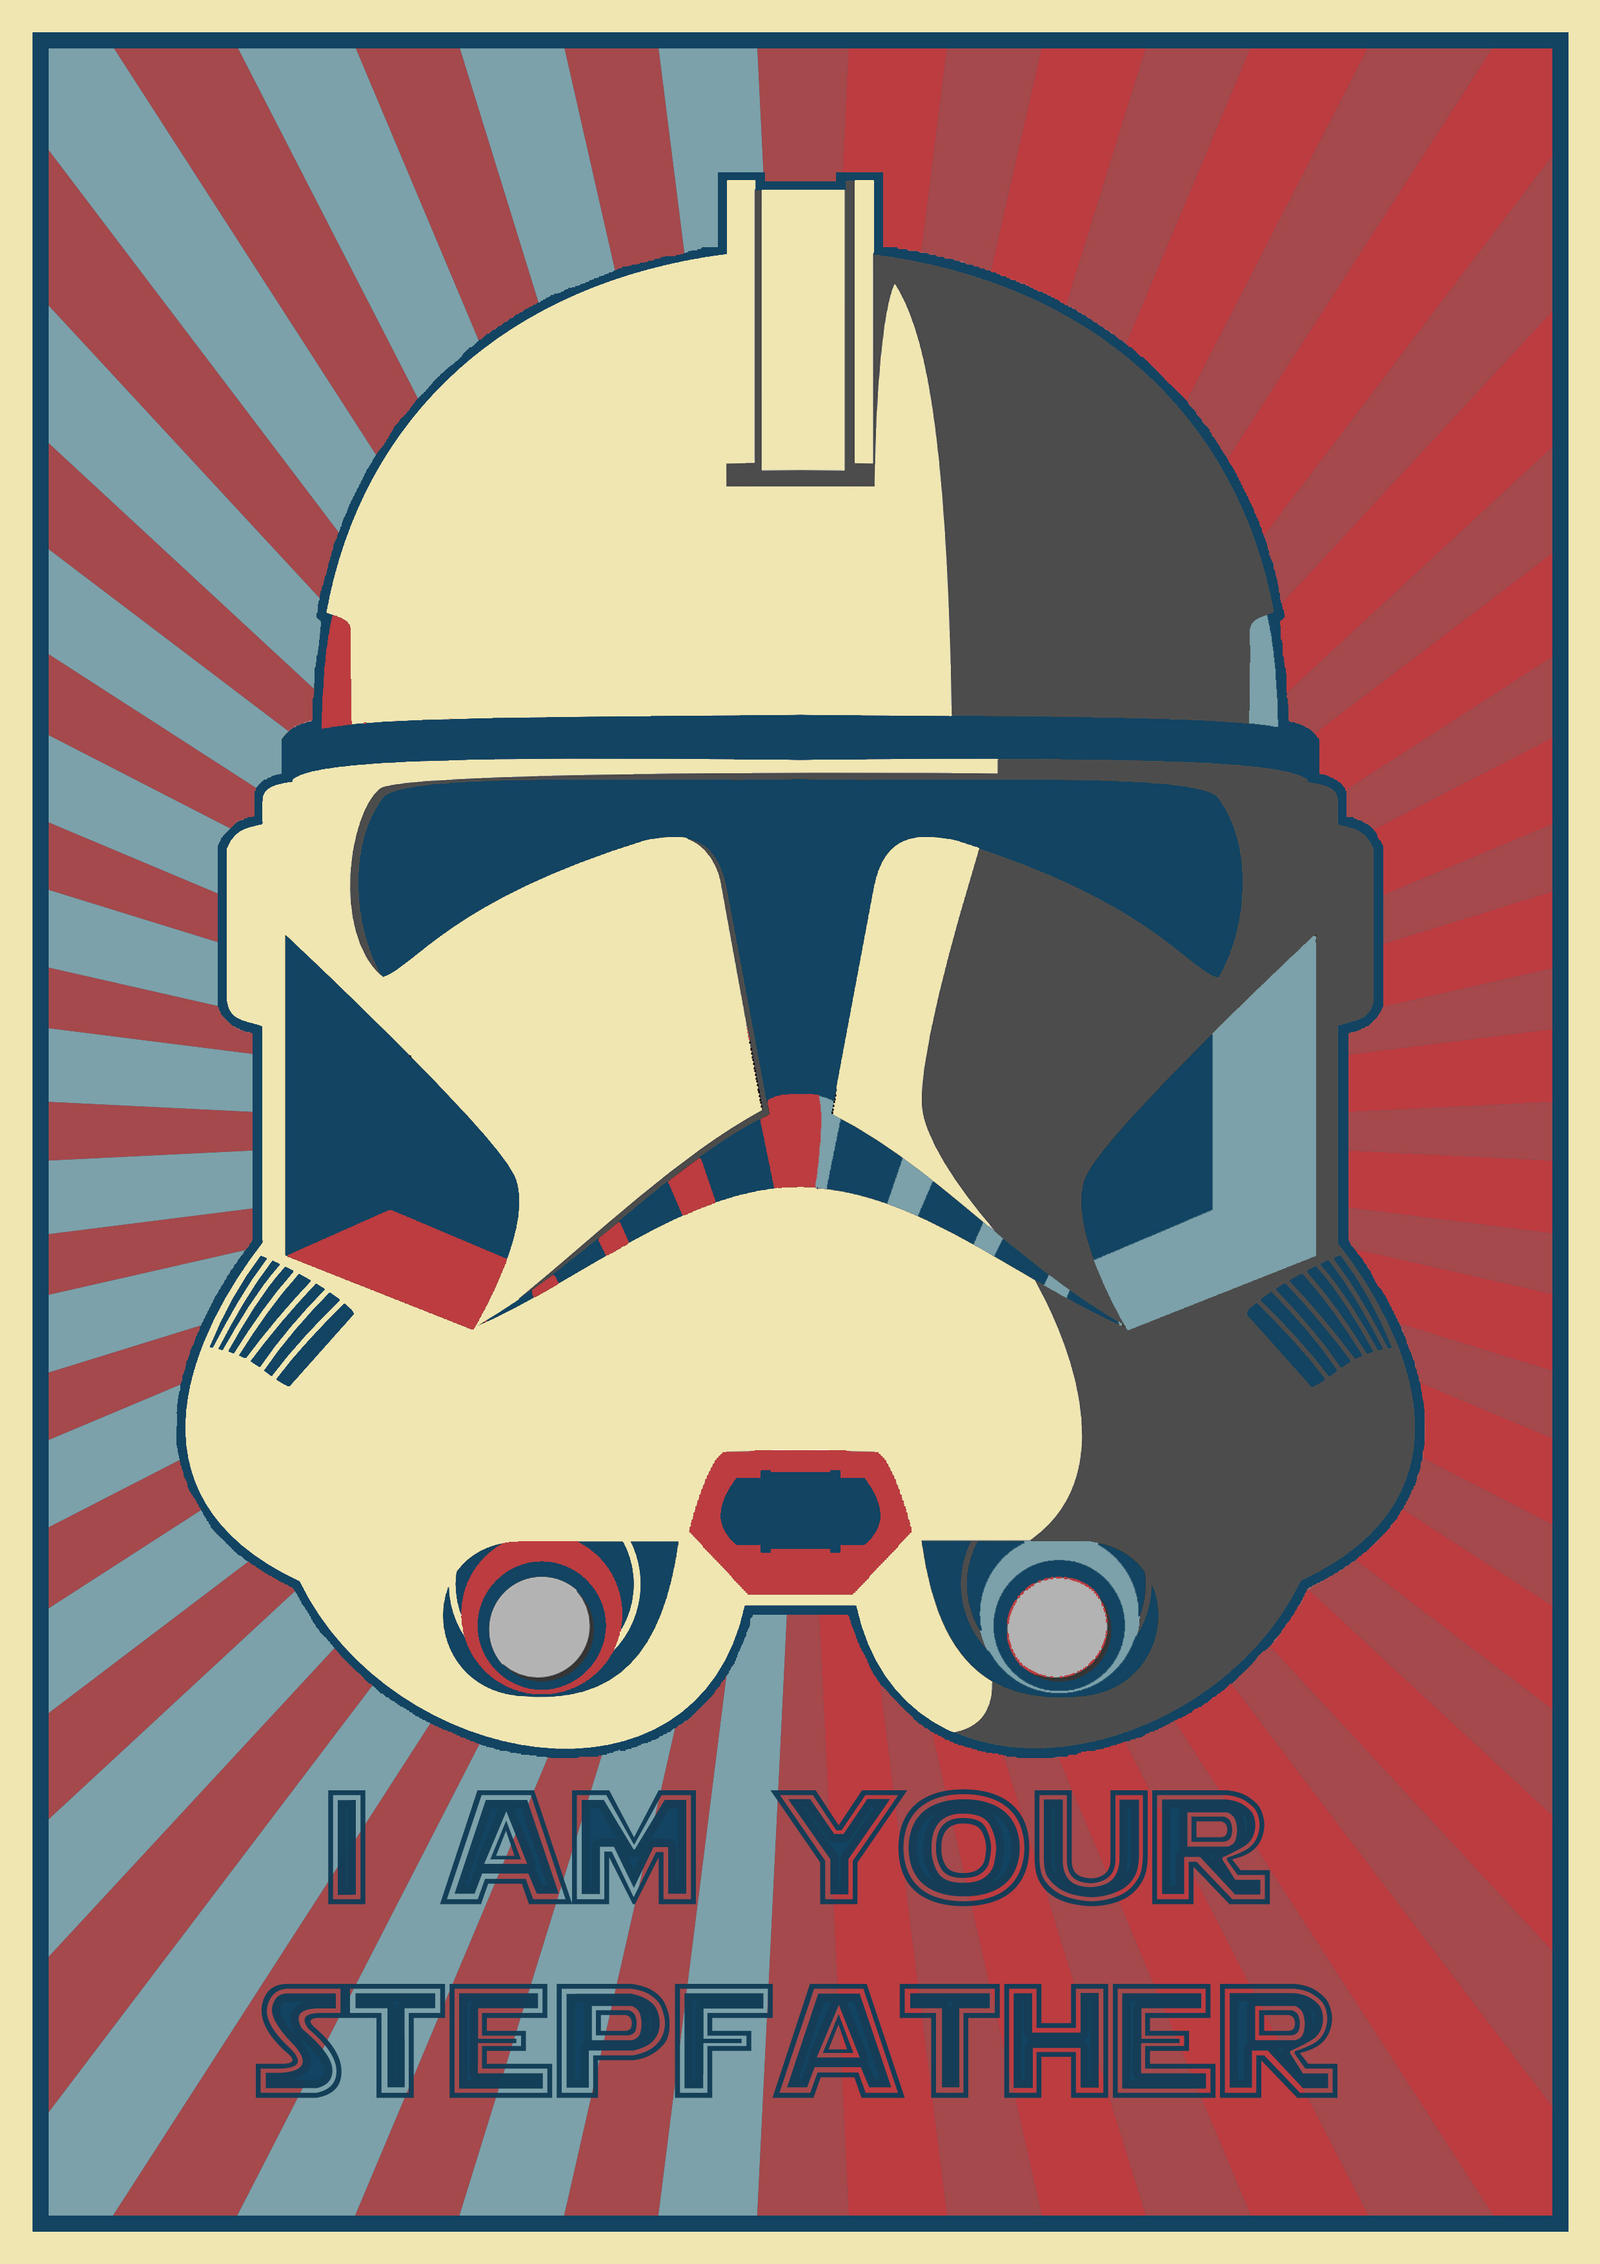 propaganda for the troopers